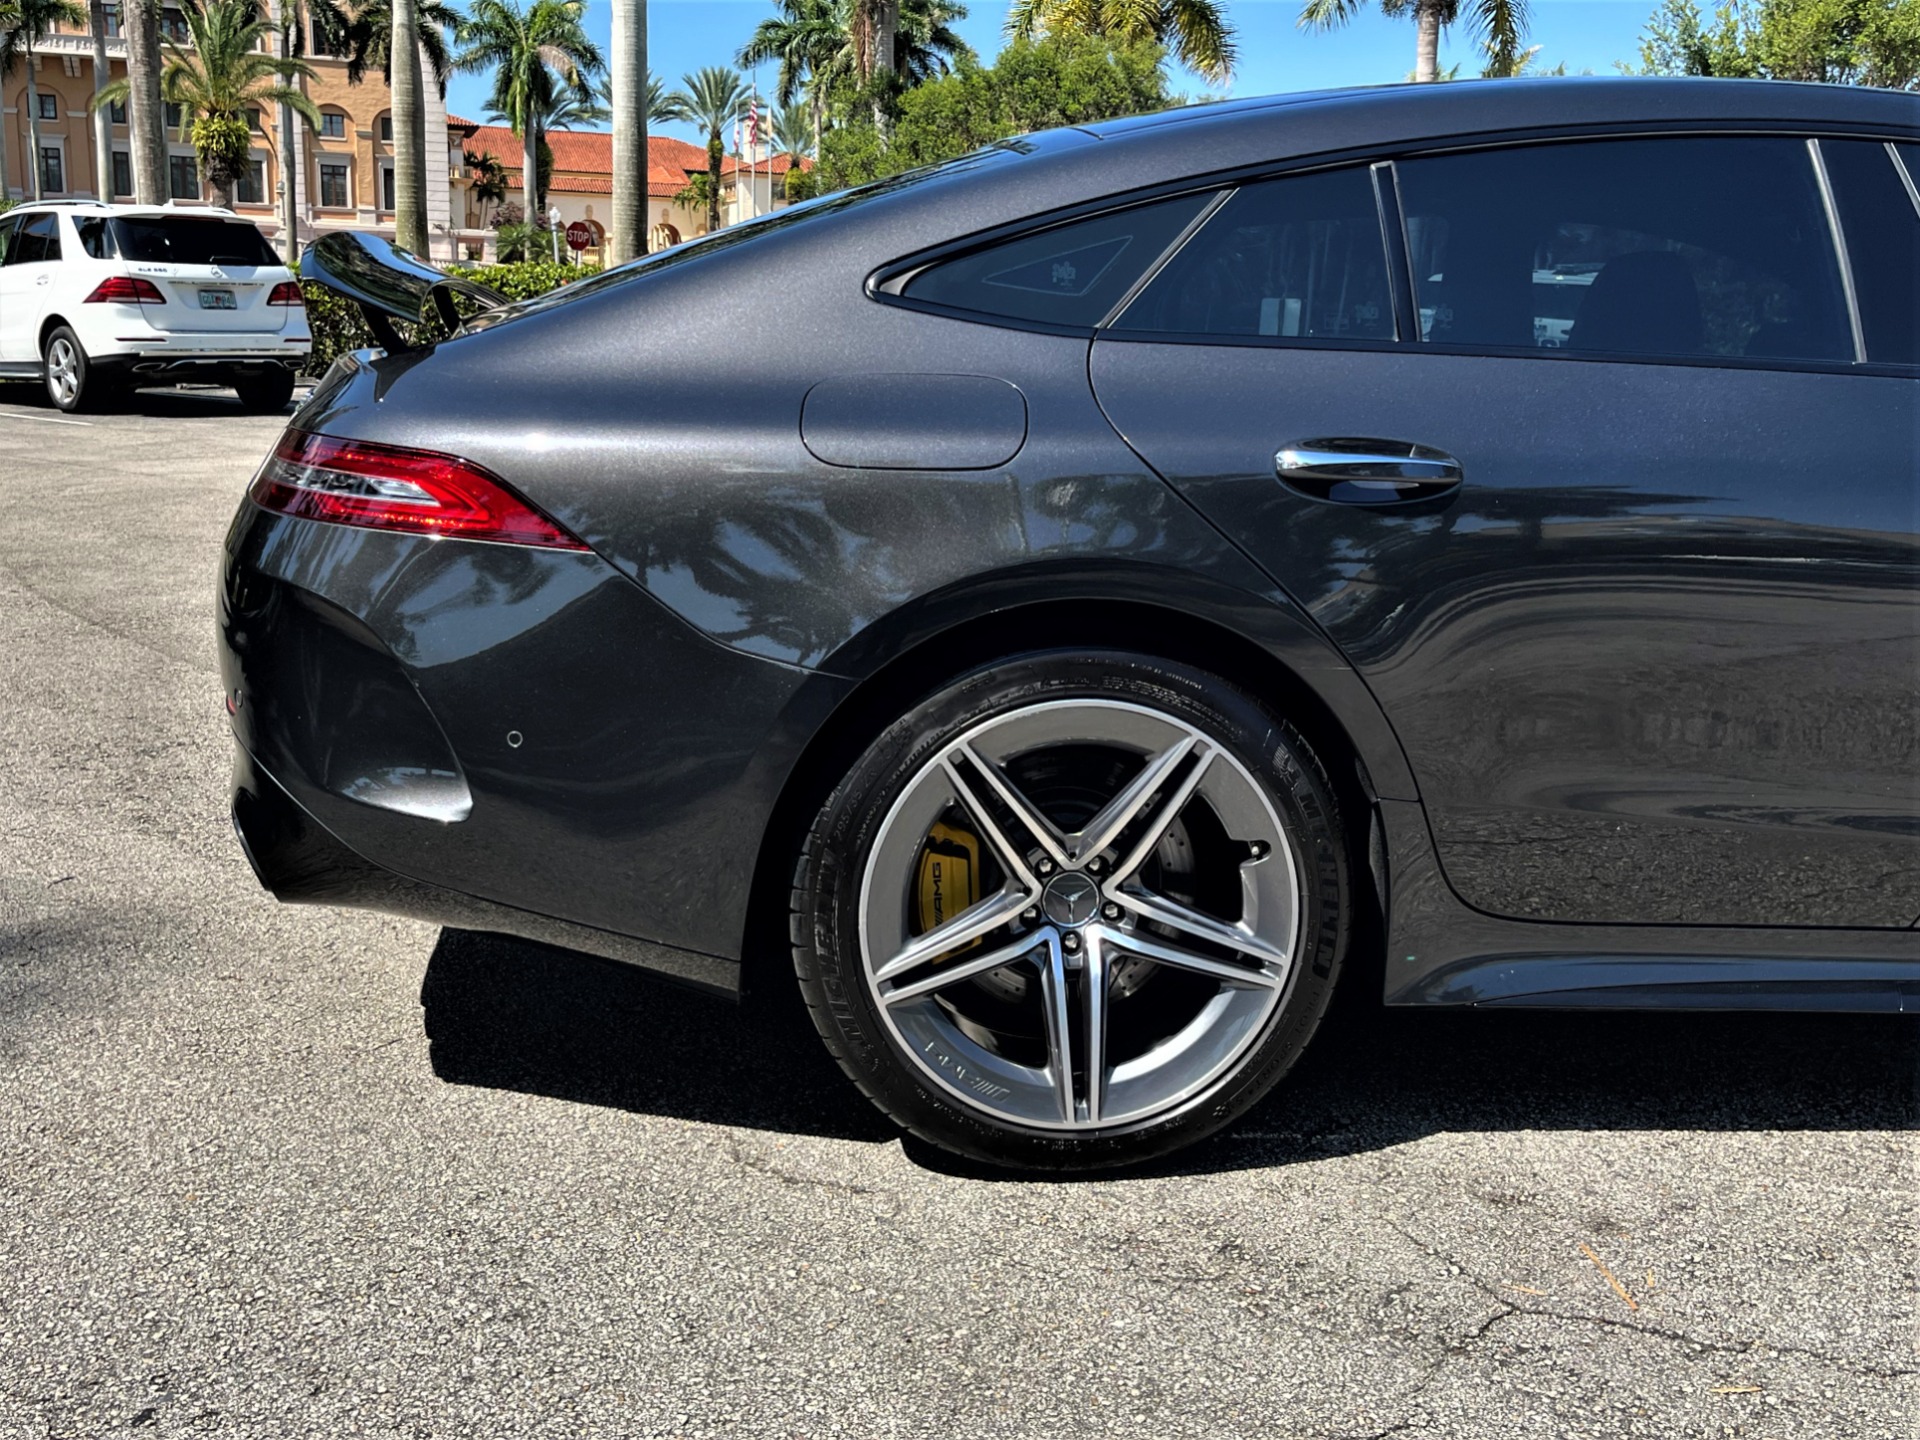 Used 2019 Mercedes-Benz AMG GT 63 S for sale $149,850 at The Gables Sports Cars in Miami FL 33146 4